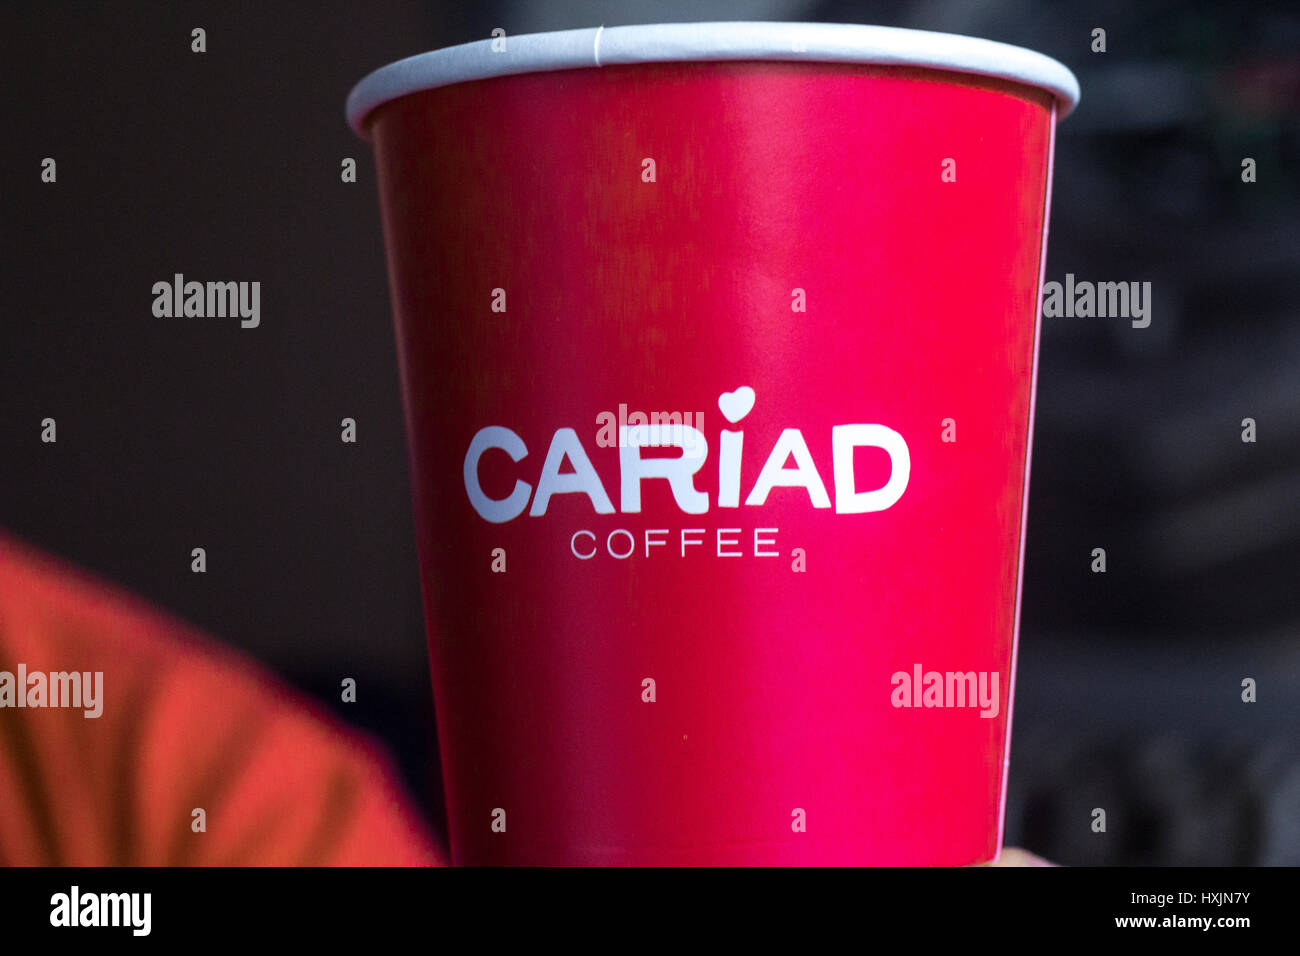 Lee Nicholas representing Cariad Coffee. Stall holders at the Cardiff Bierkeller Business Expo for local businesses in the city centre. hashtag cariad coffee @Cariad coffe by Ella Geen Stock Photo